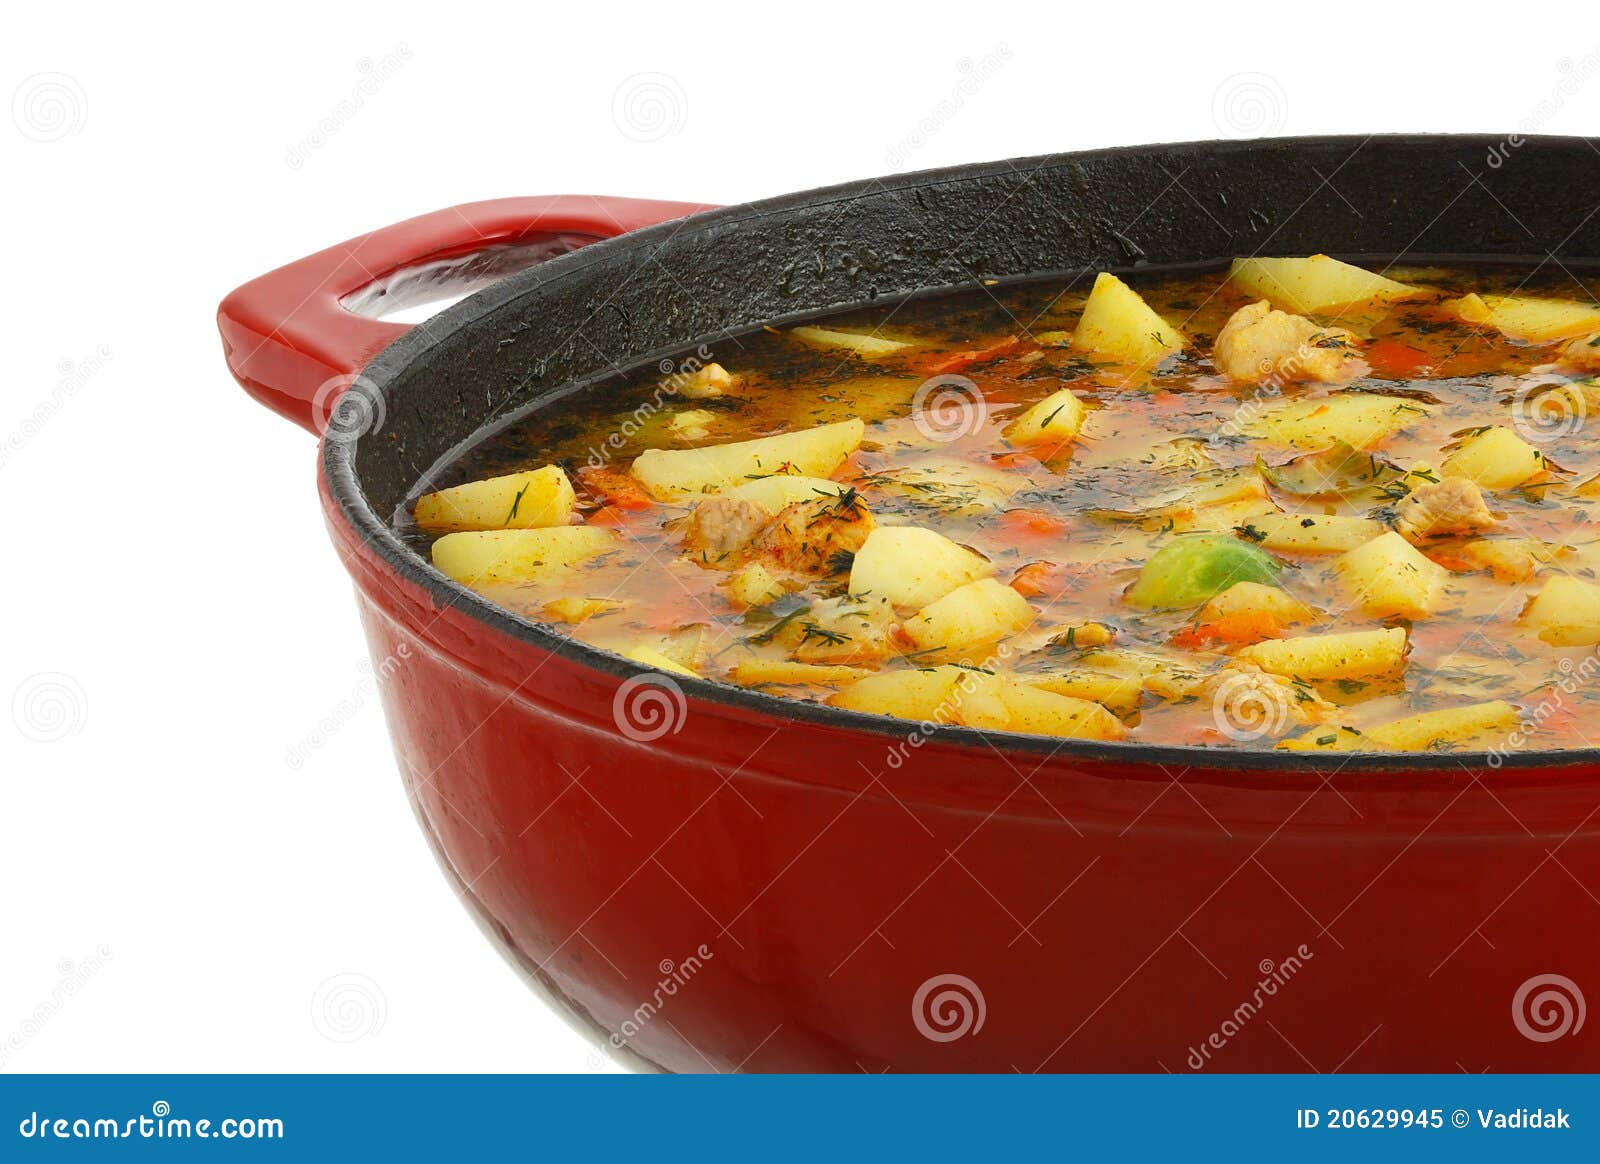 Saucepan with hot ragout stock image. Image of green - 20629945